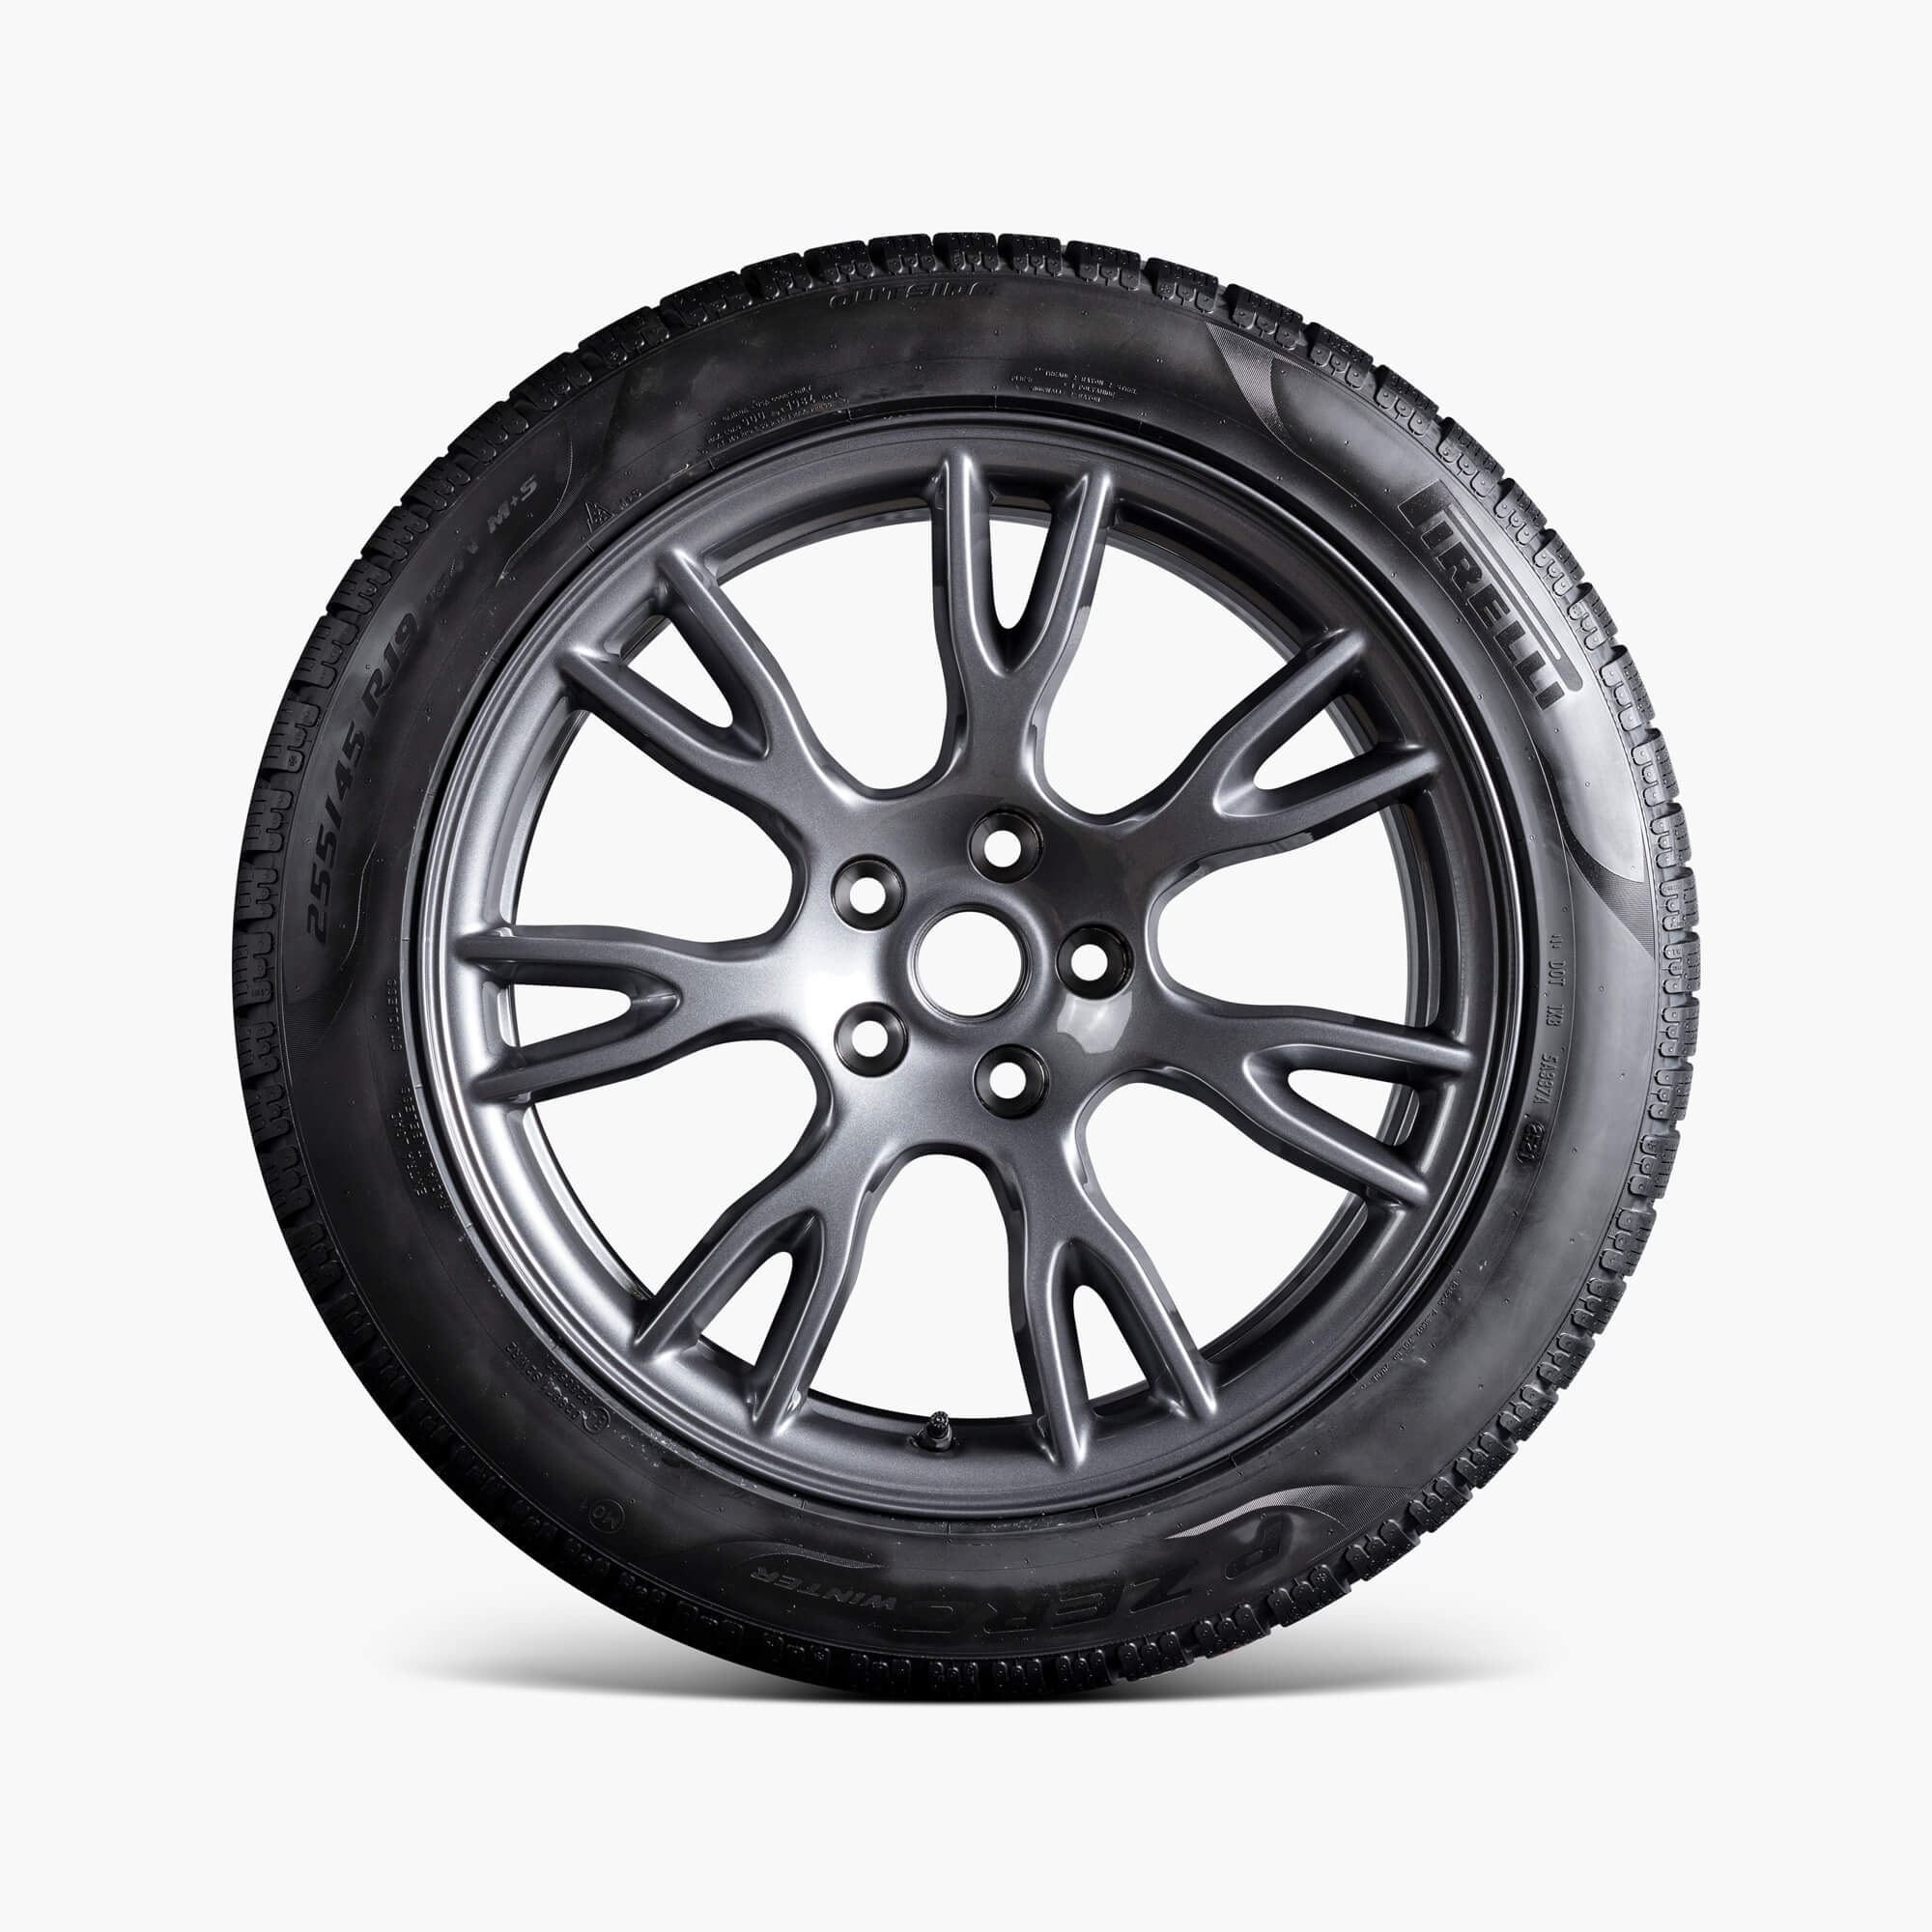 Model S 19" Tempest Wheel and Winter Tire Package